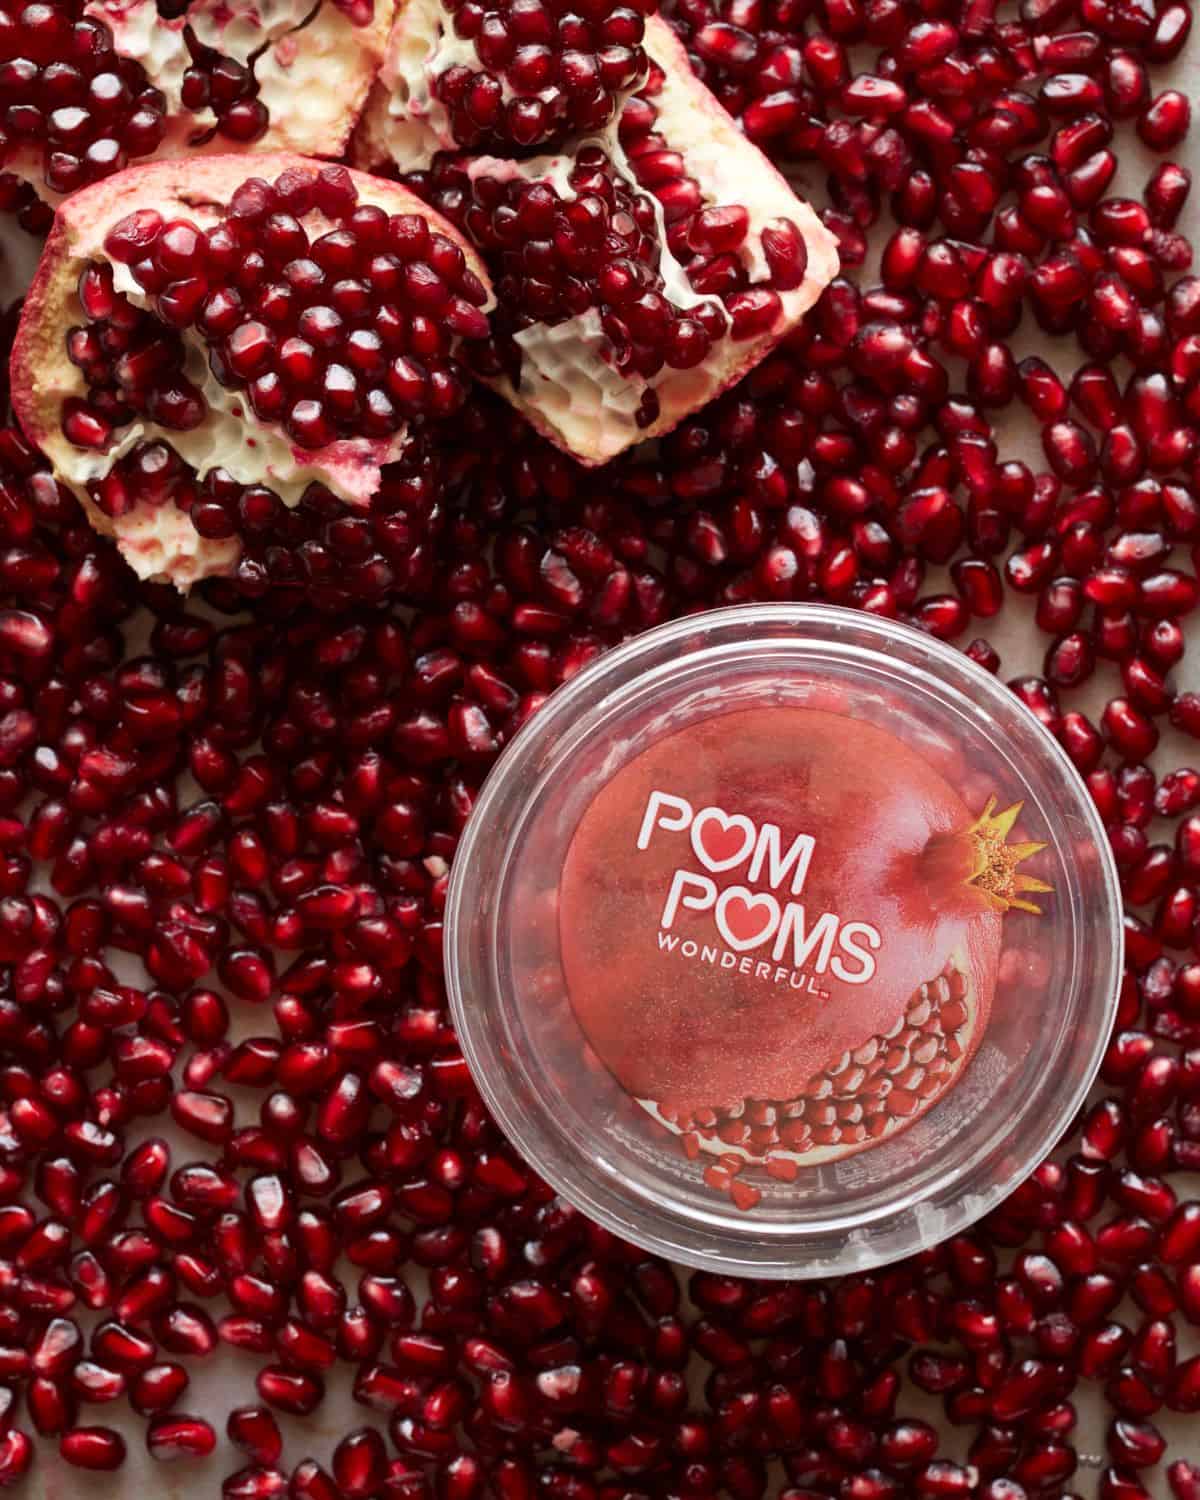 A close up shot of POM POMS box of pomegranate seeds placed on a counter full of pomegranate seeds and pomegranate quarters.